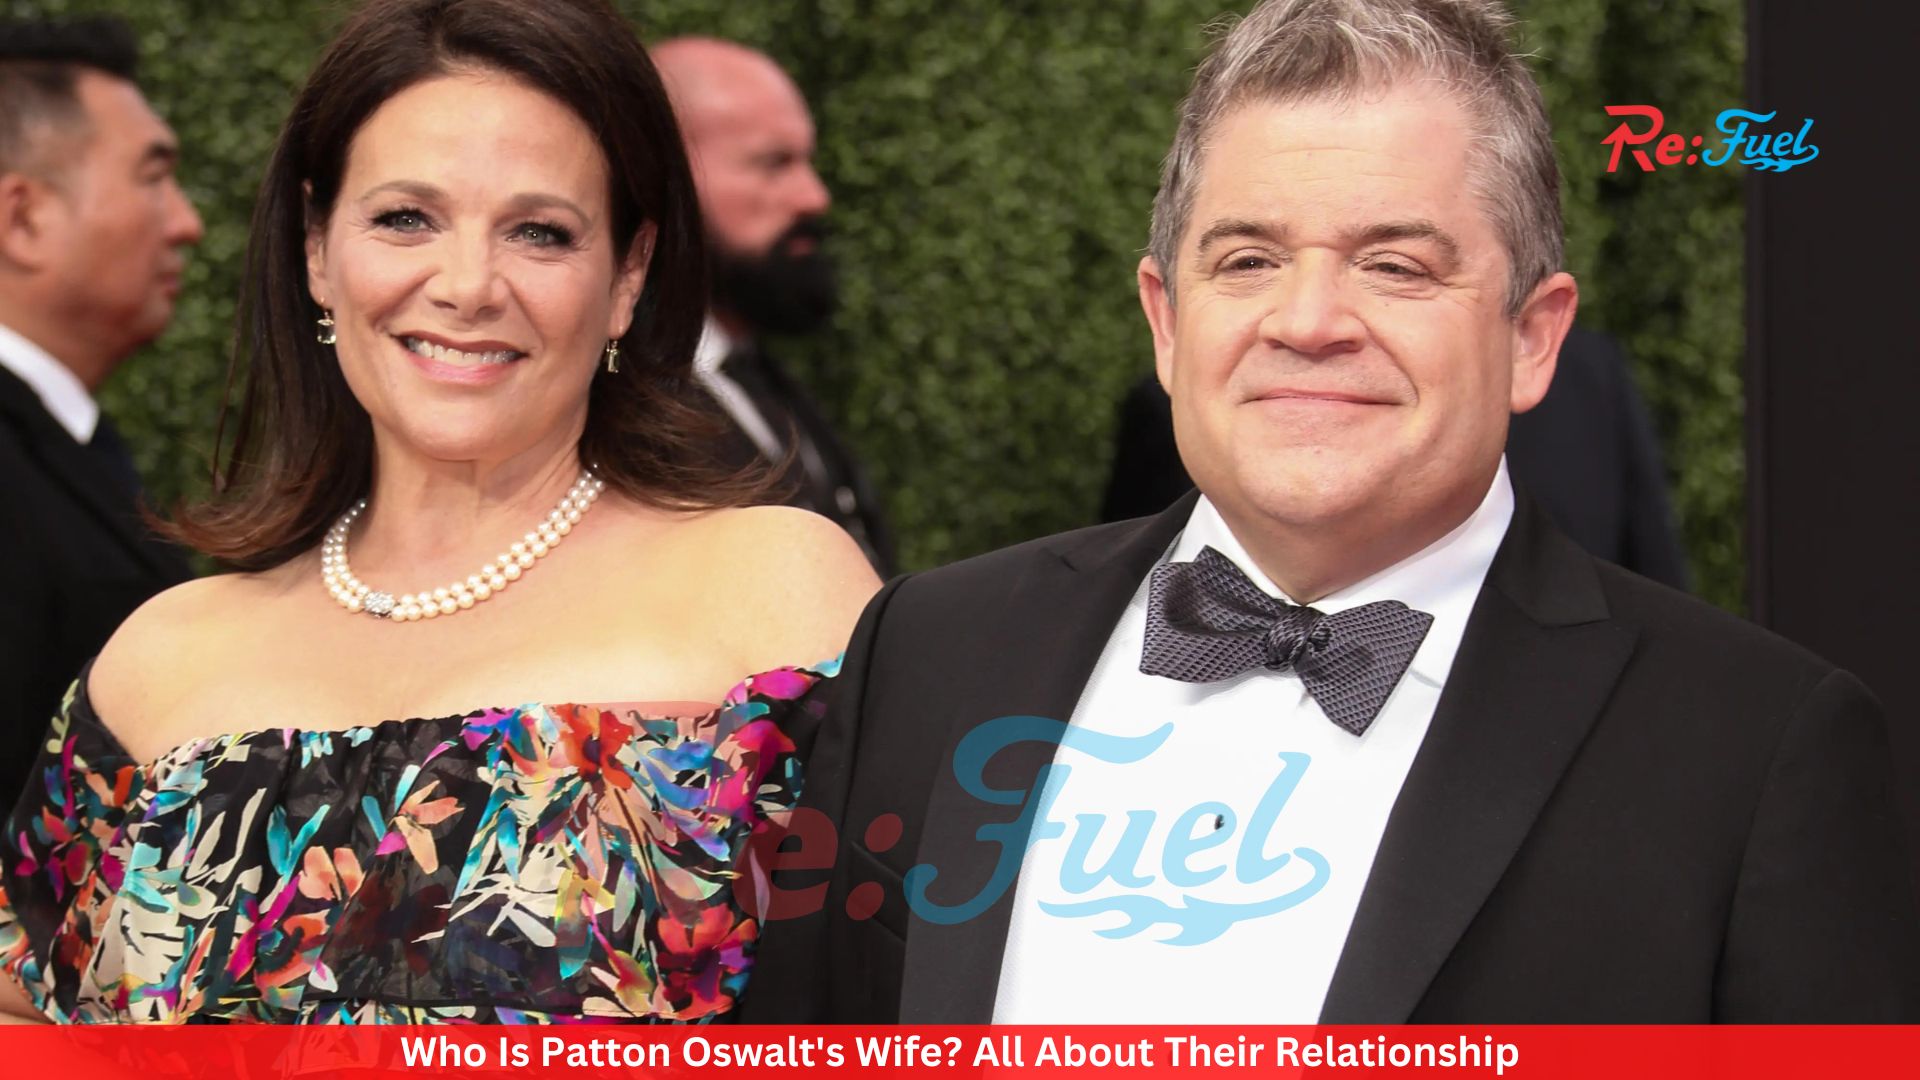 Who Is Patton Oswalt's Wife? All About Their Relationship